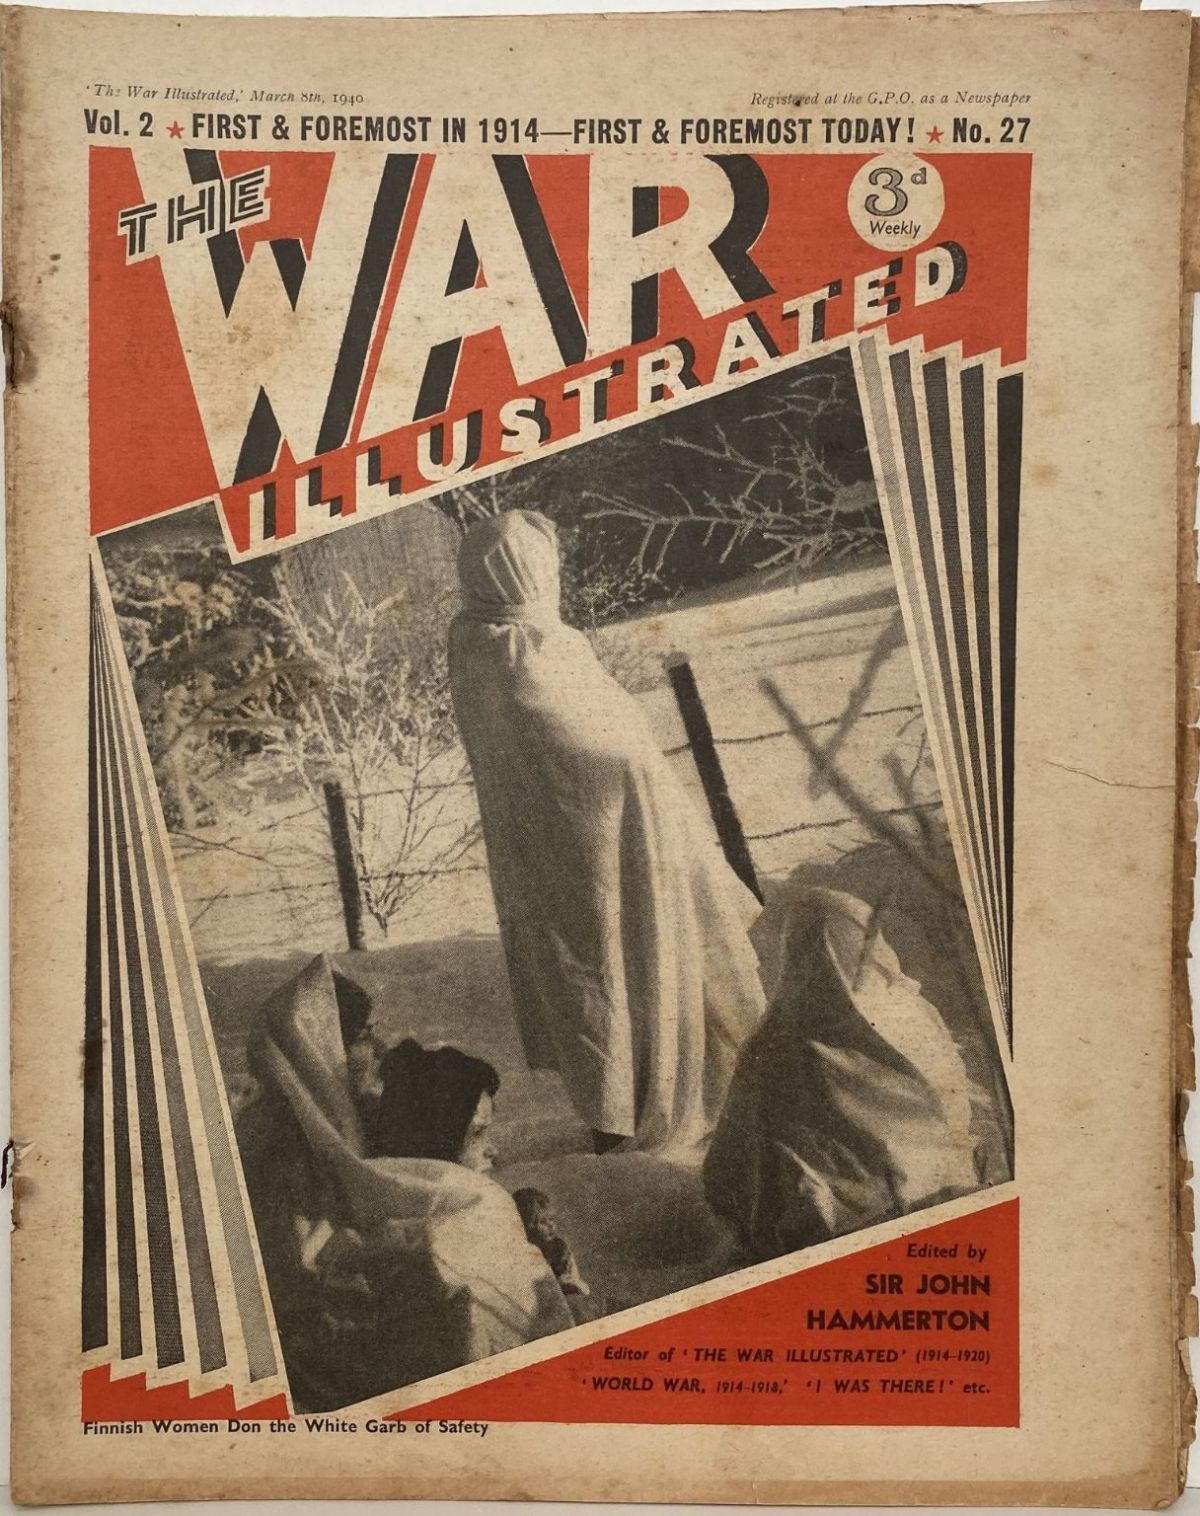 THE WAR ILLUSTRATED - Vol 2, No 27, 8th March 1940